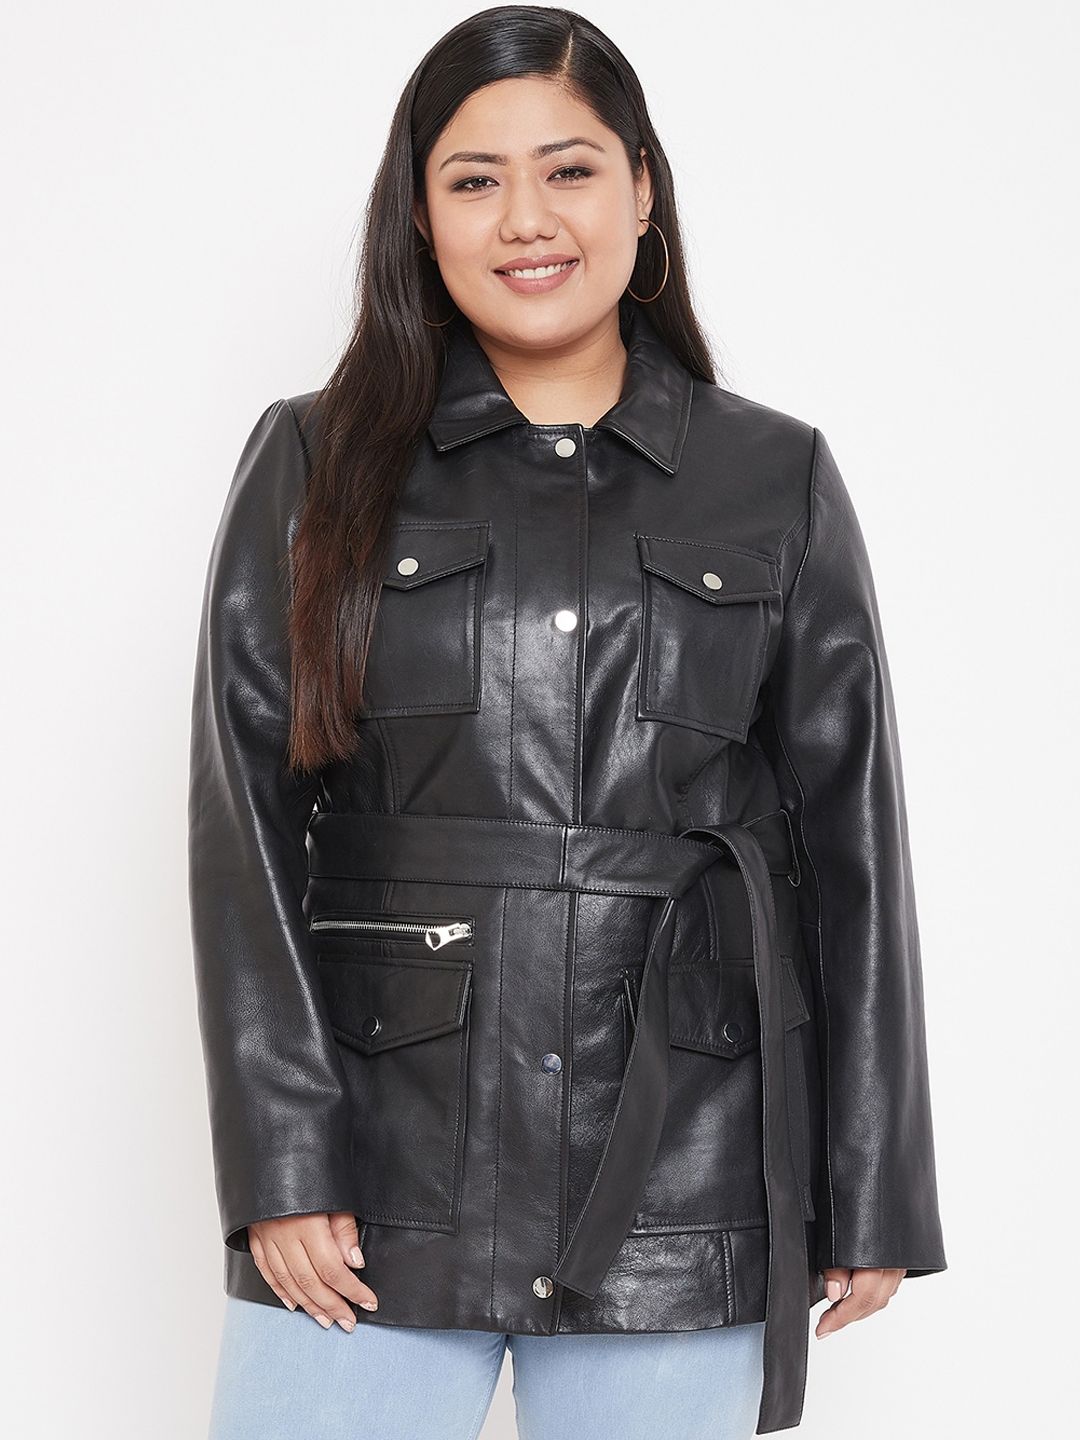 Justanned Plus Women Plus Size Black Solid Leather Jacket Price in India